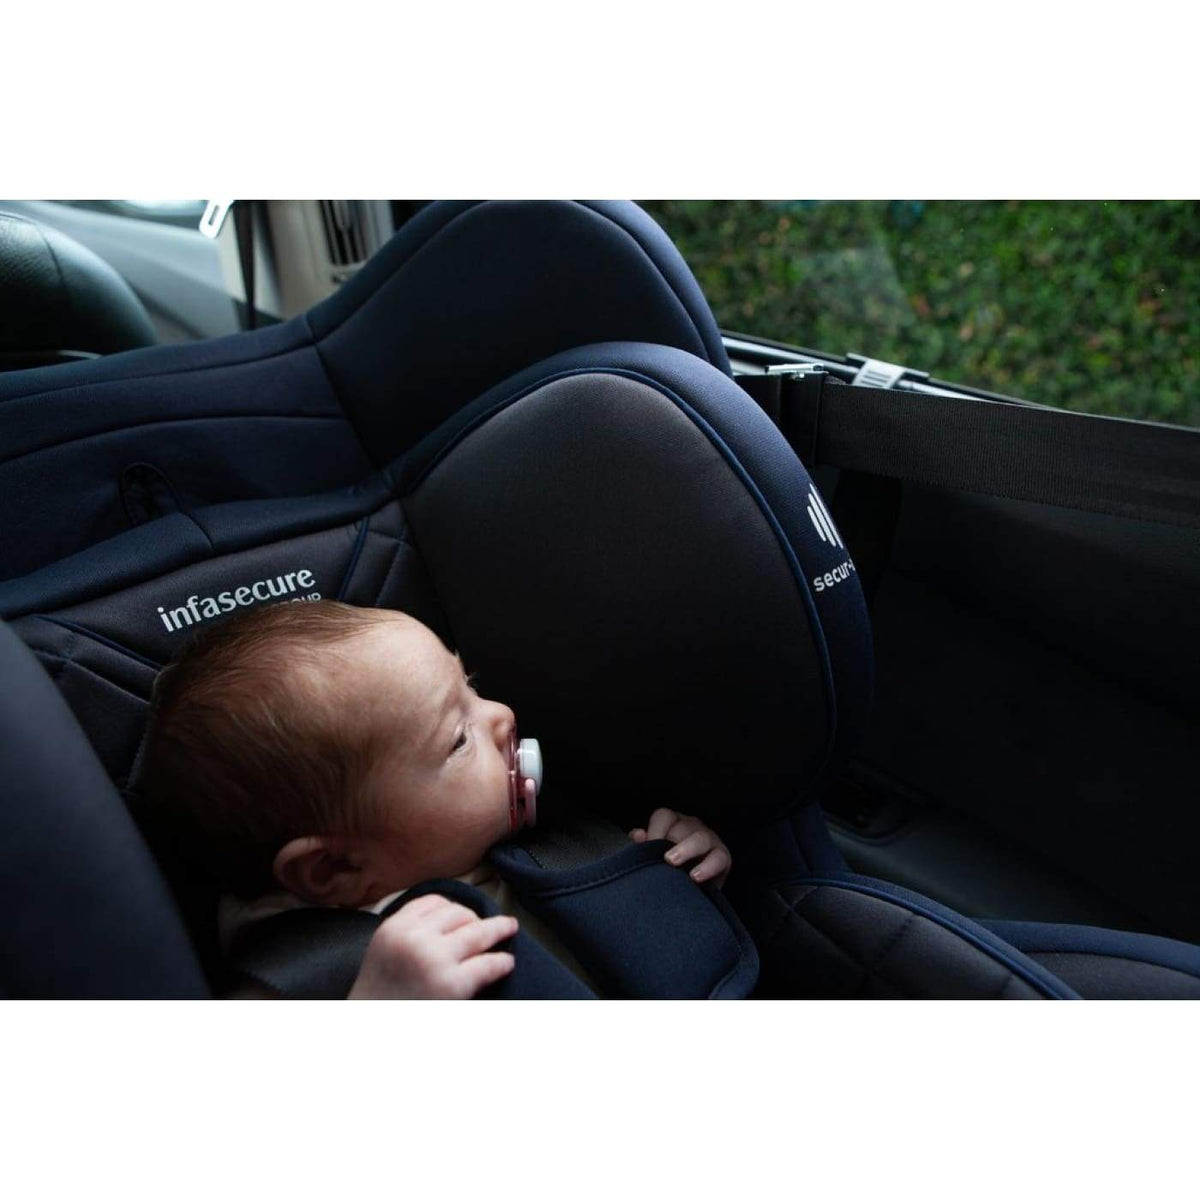 Infasecure Attain Premium More Convertible Car Seat Isofix - Midnight Blue 0-4YR - Midnight Blue - CAR SEATS - CONV ISOFIX CAR SEATS (0-4YR)